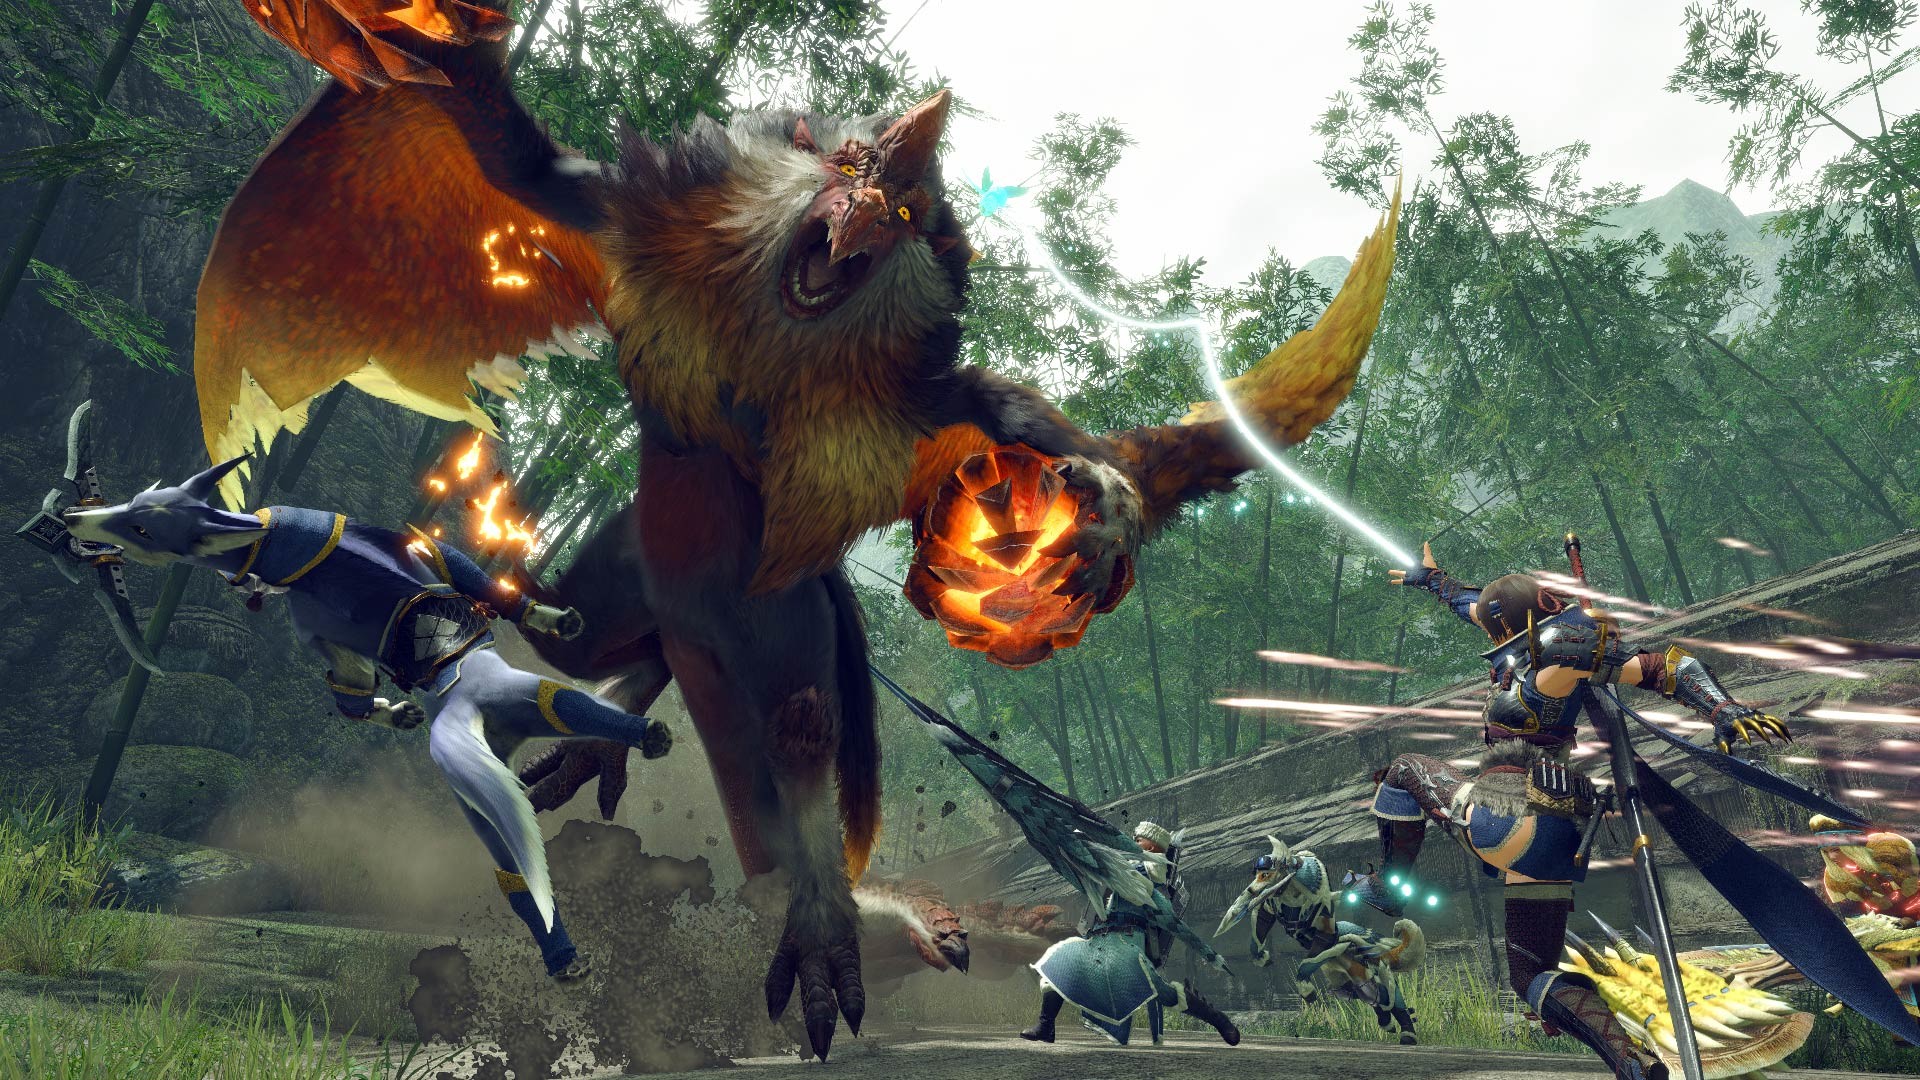 Monster Hunter Rise System Requirements